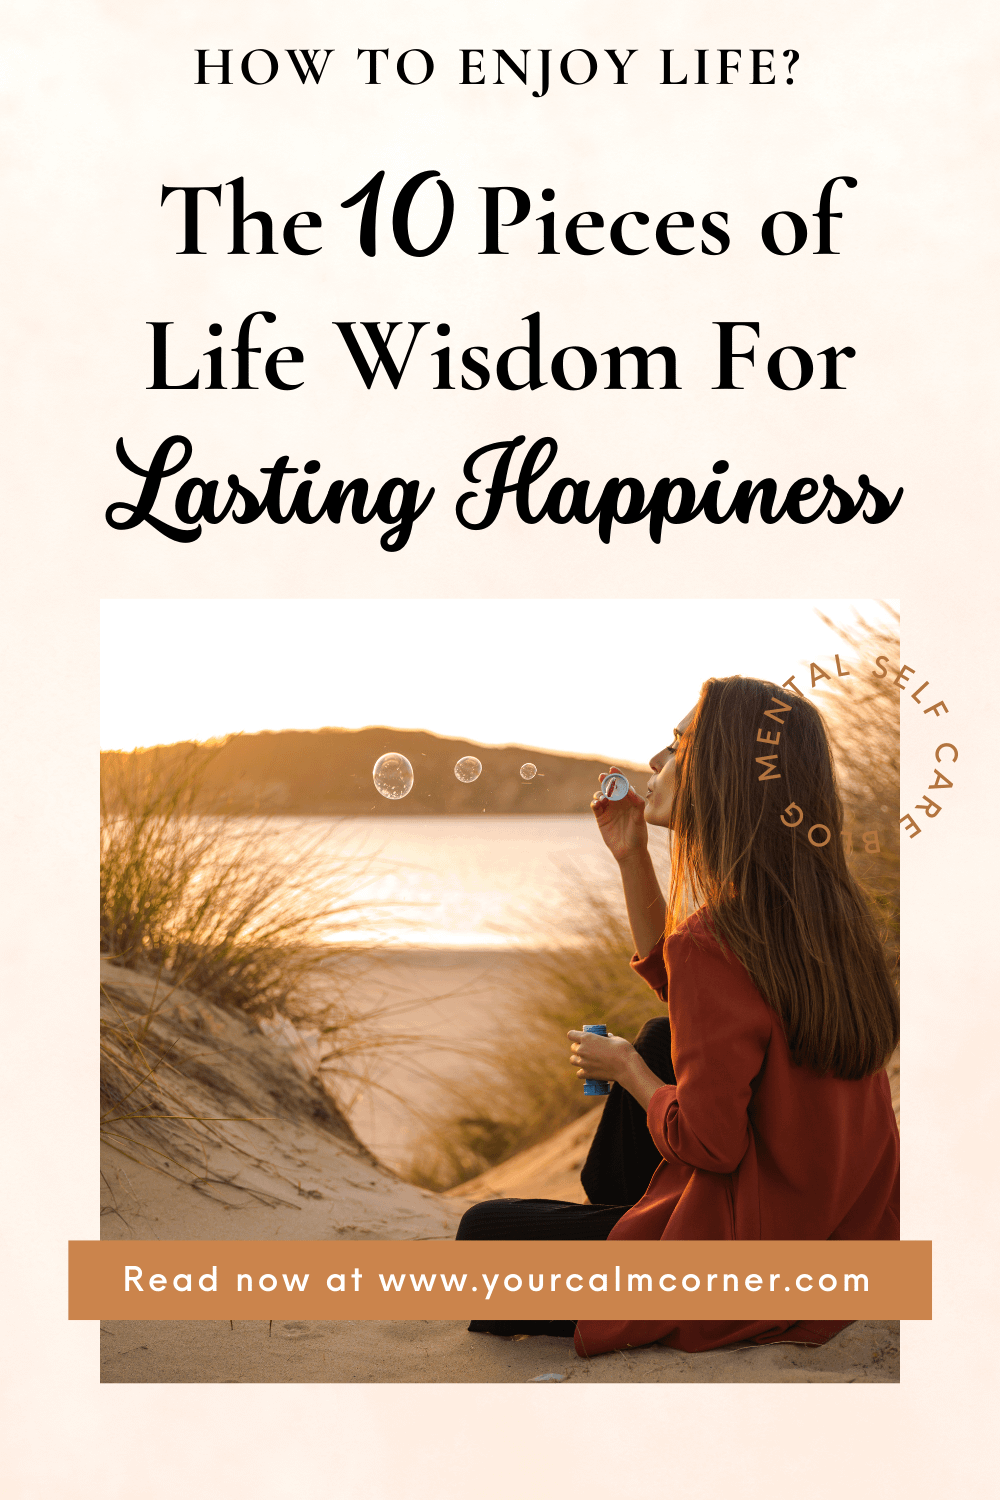 how to enjoy life - the 10 pieces of life wisdom for lasting happiness